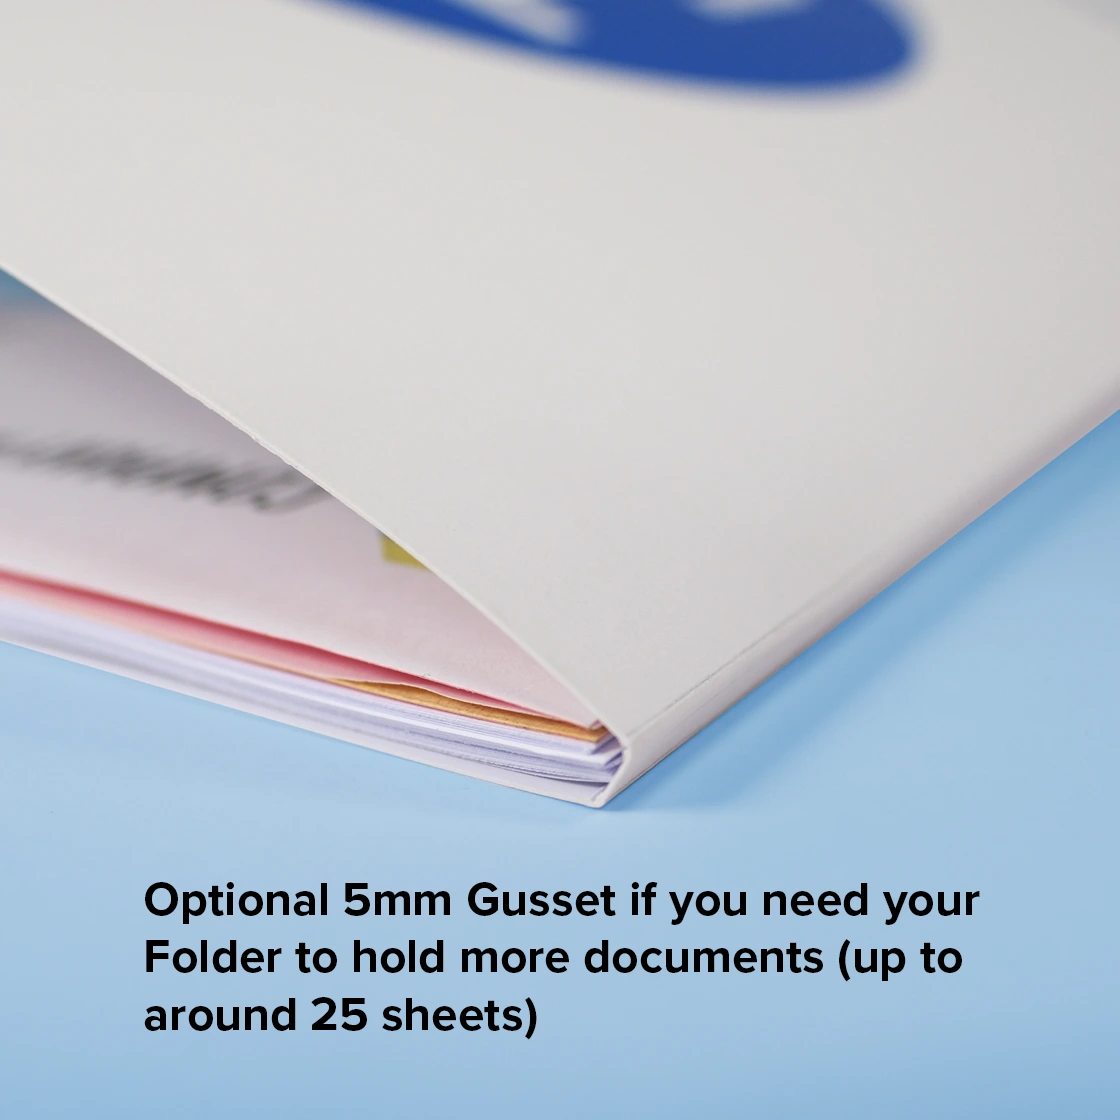 Larger capacity folders printed with 5mm Gusset for 25 pages